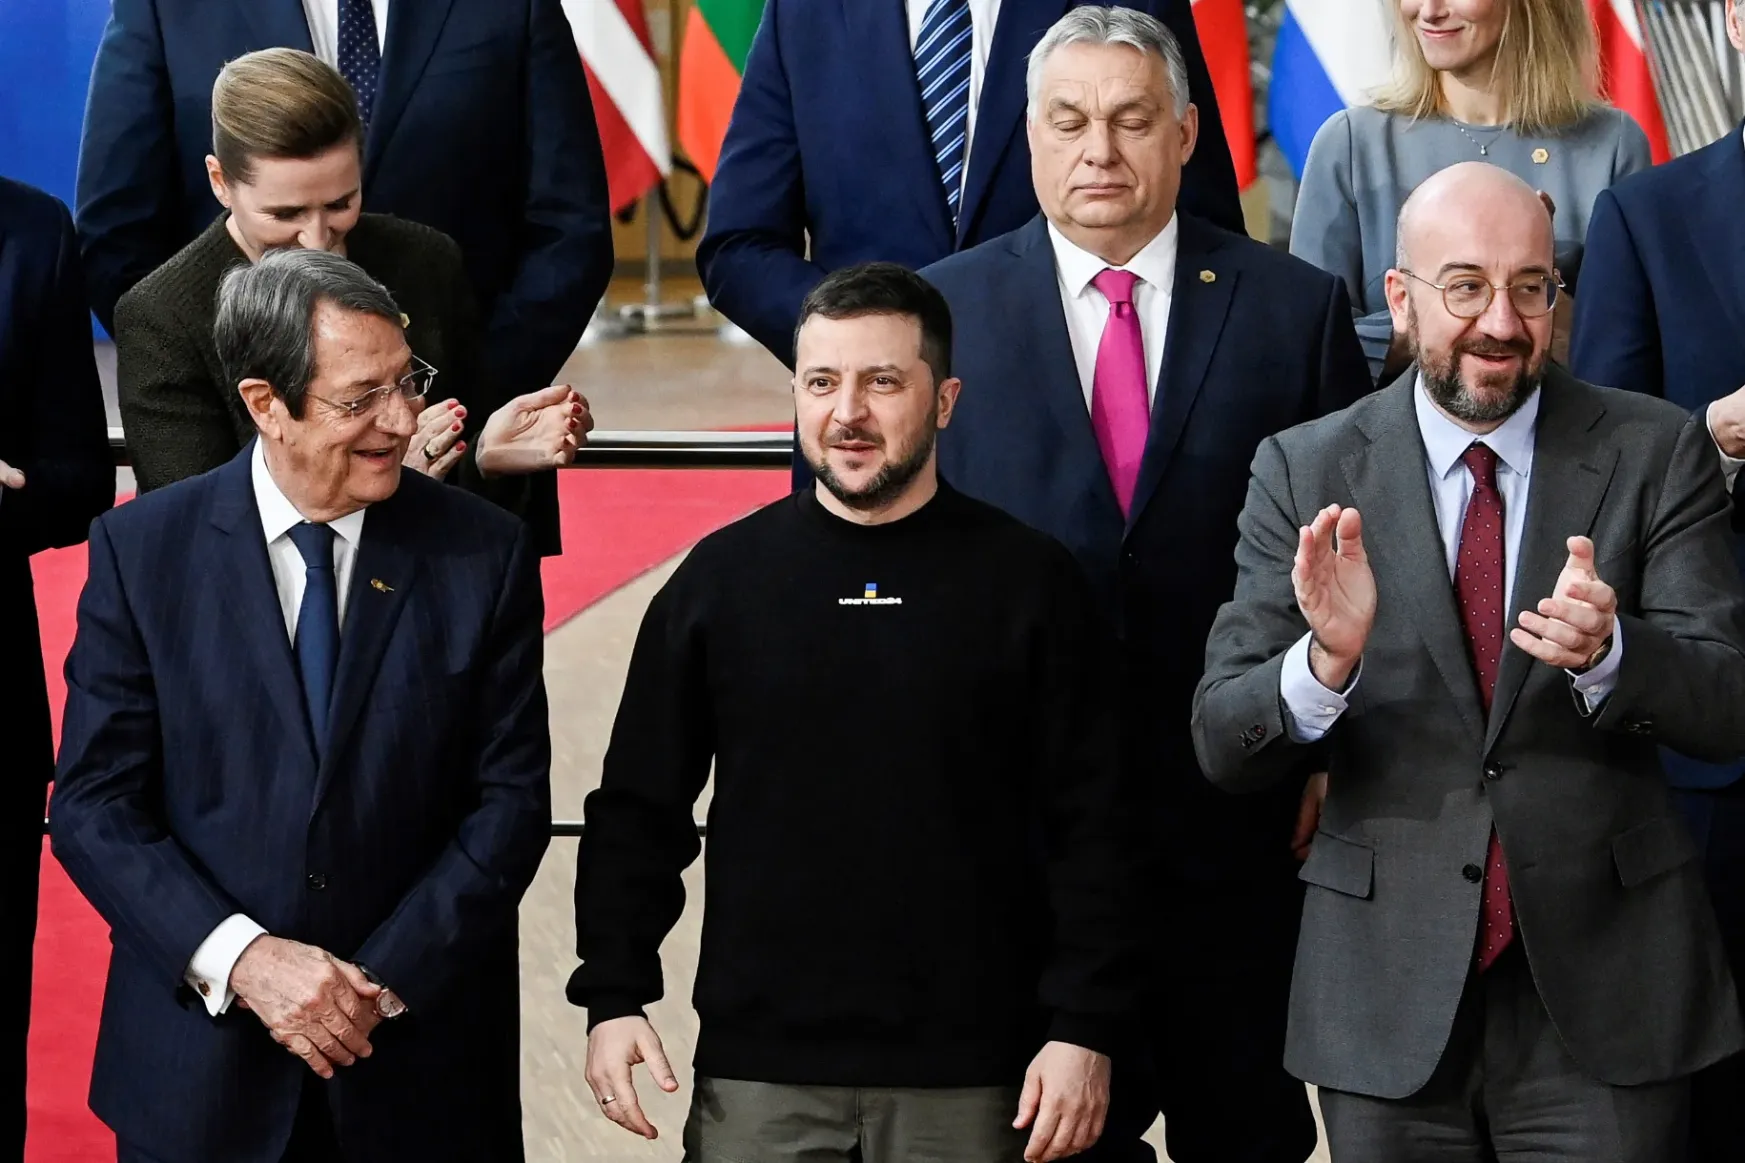 EU leaders greet Zelensky with clapping, Orbán doesn't